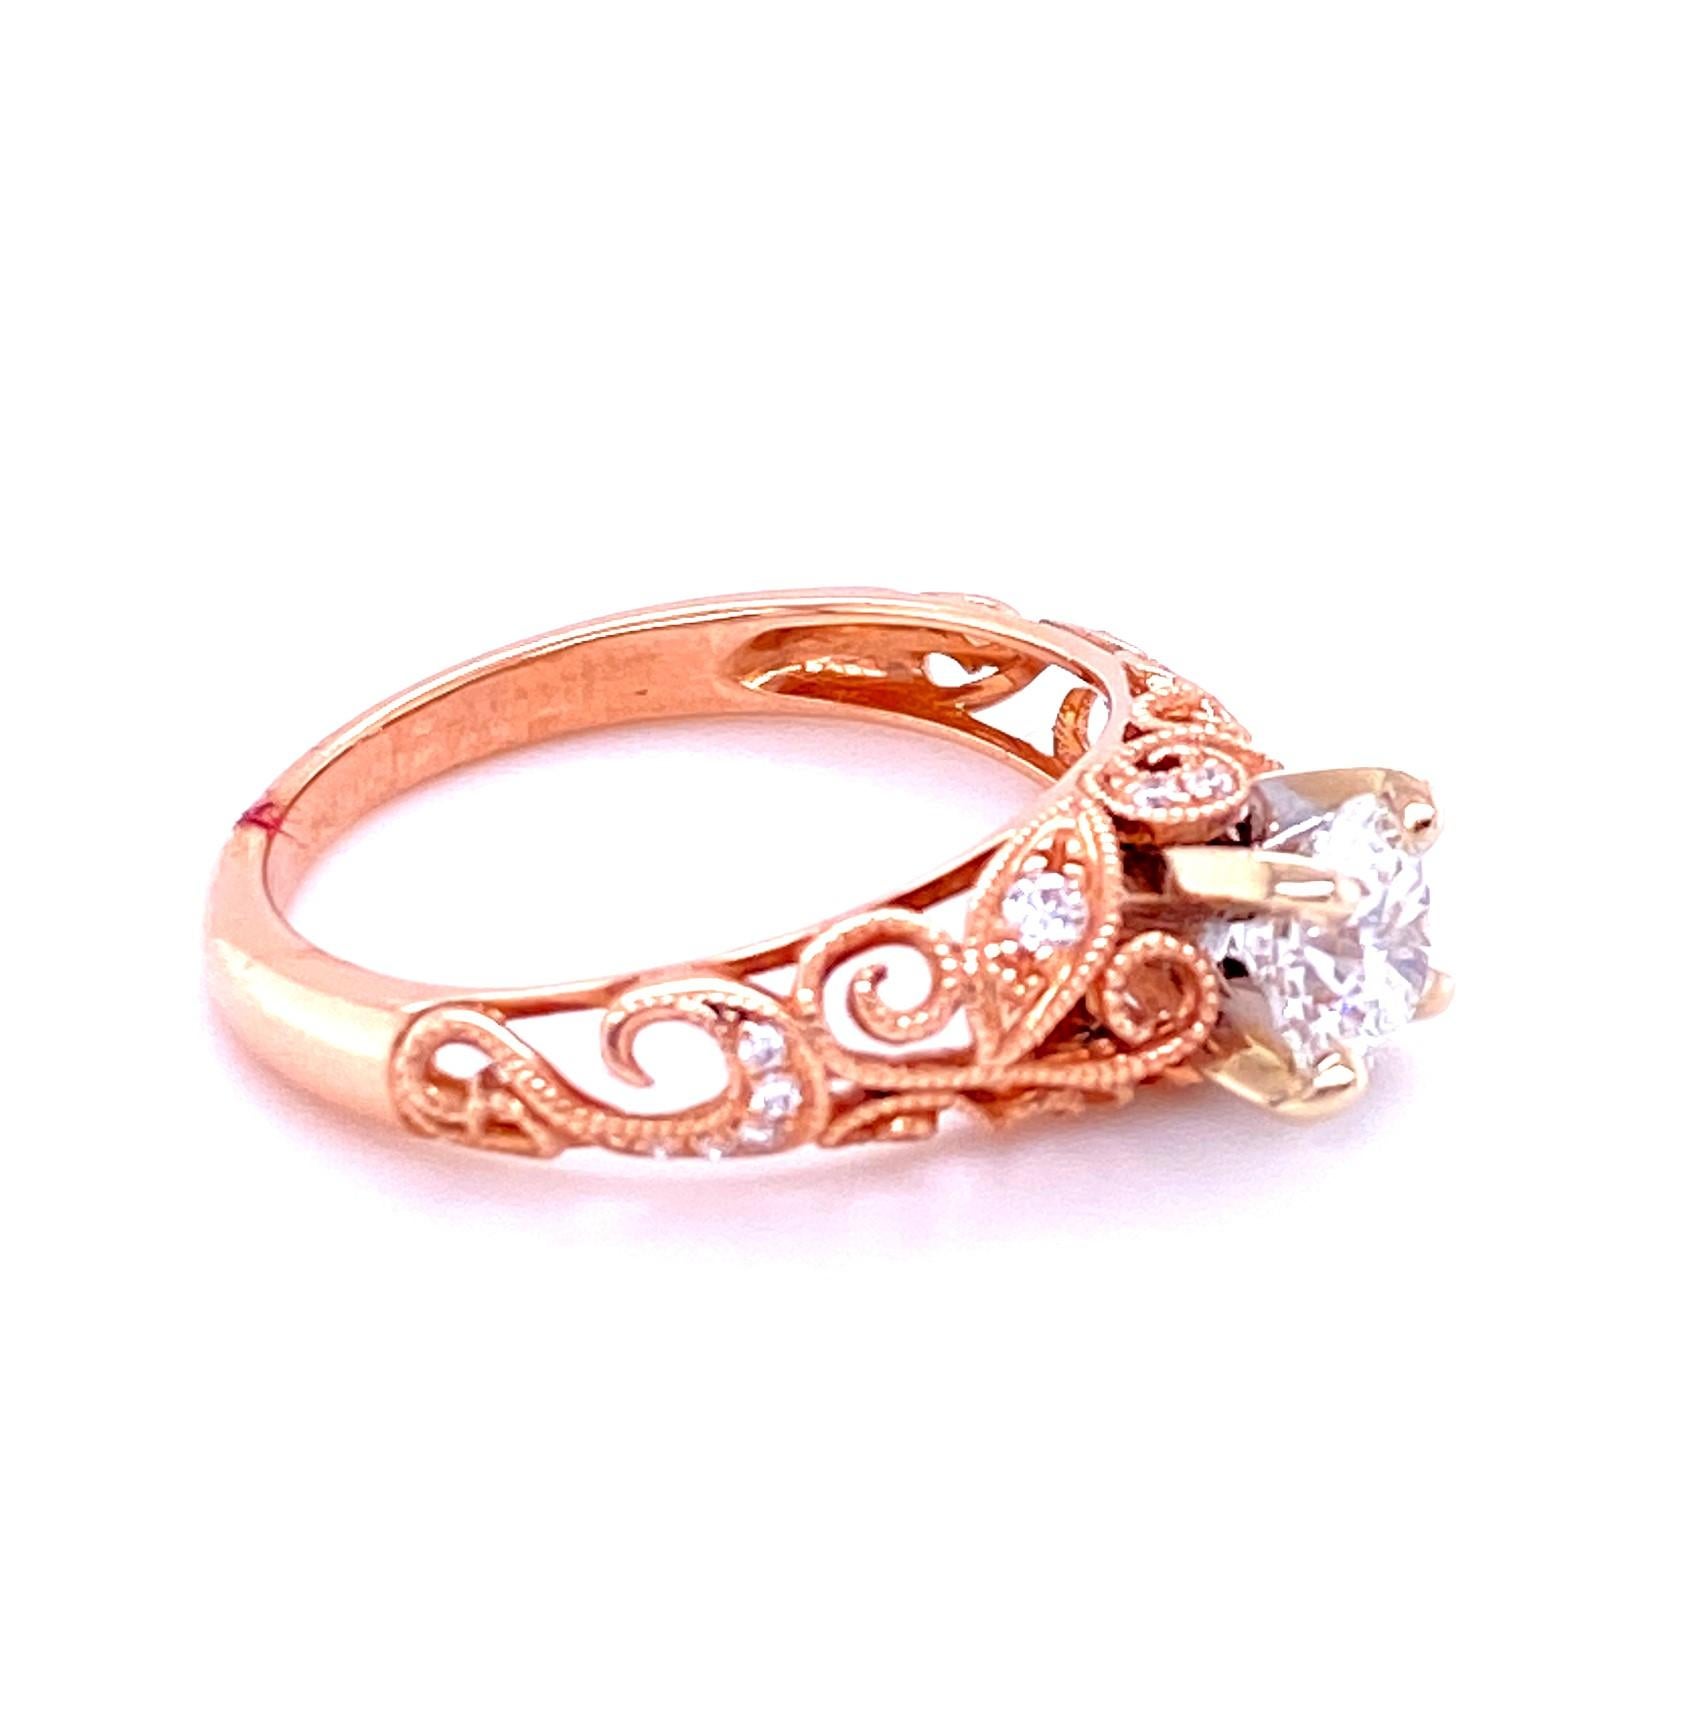 14 karat rose and white gold Art Nouveua inspired contemporary diamond engagement ring set with one 0.72 carat round brilliant diamond with G color and SI1 clarity set in a four prong white gold head on an open work rose gold mounting with a leaf